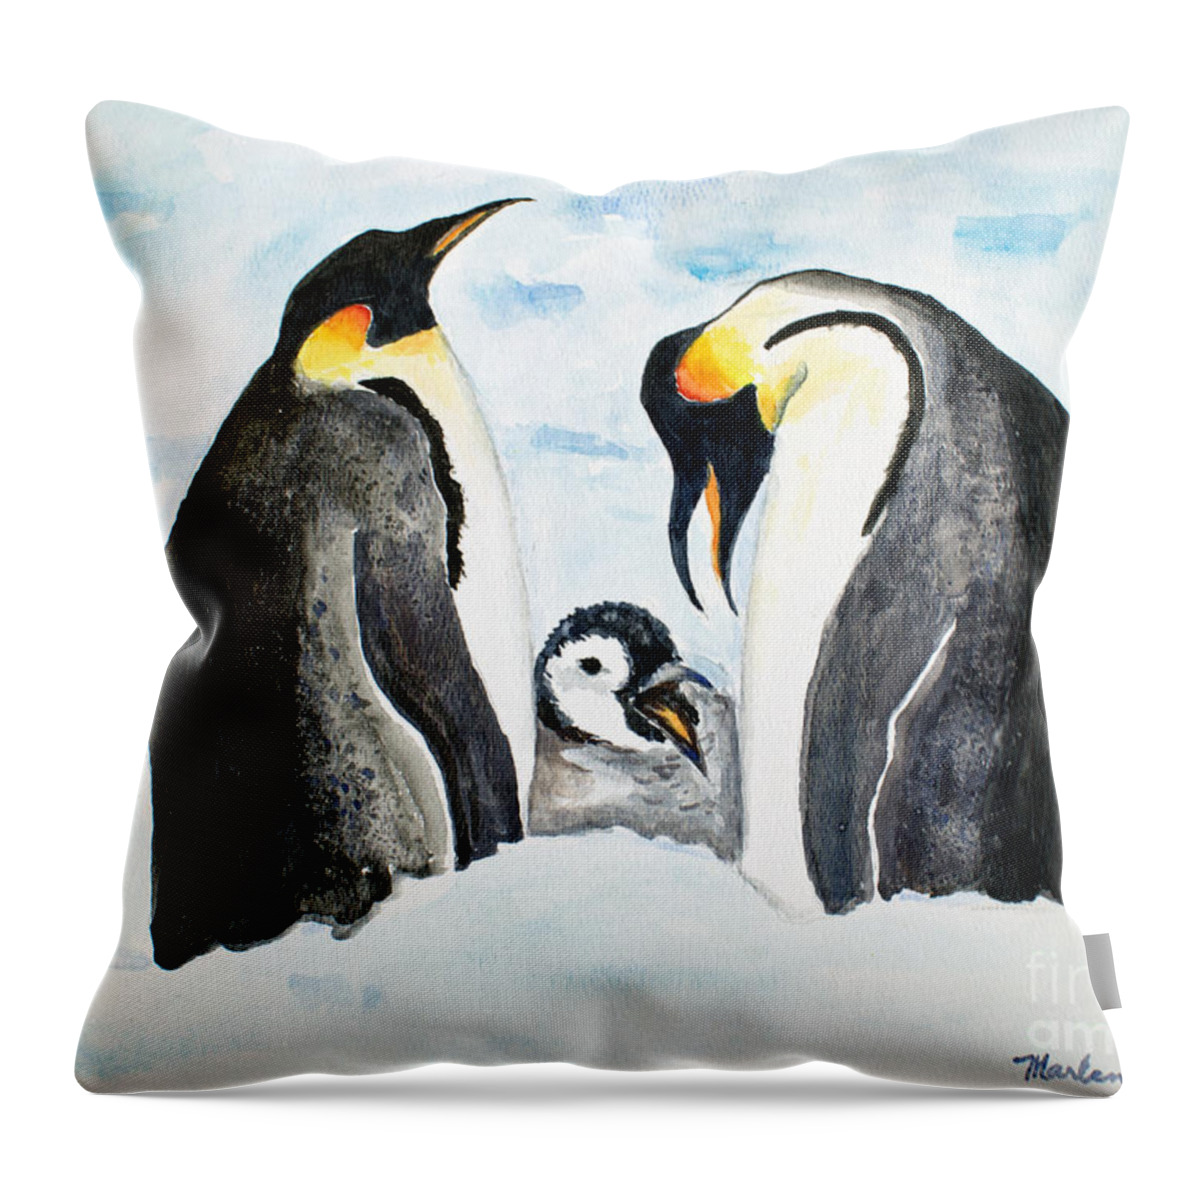 Penguin Throw Pillow featuring the painting And Baby Makes Three by Marlene Schwartz Massey